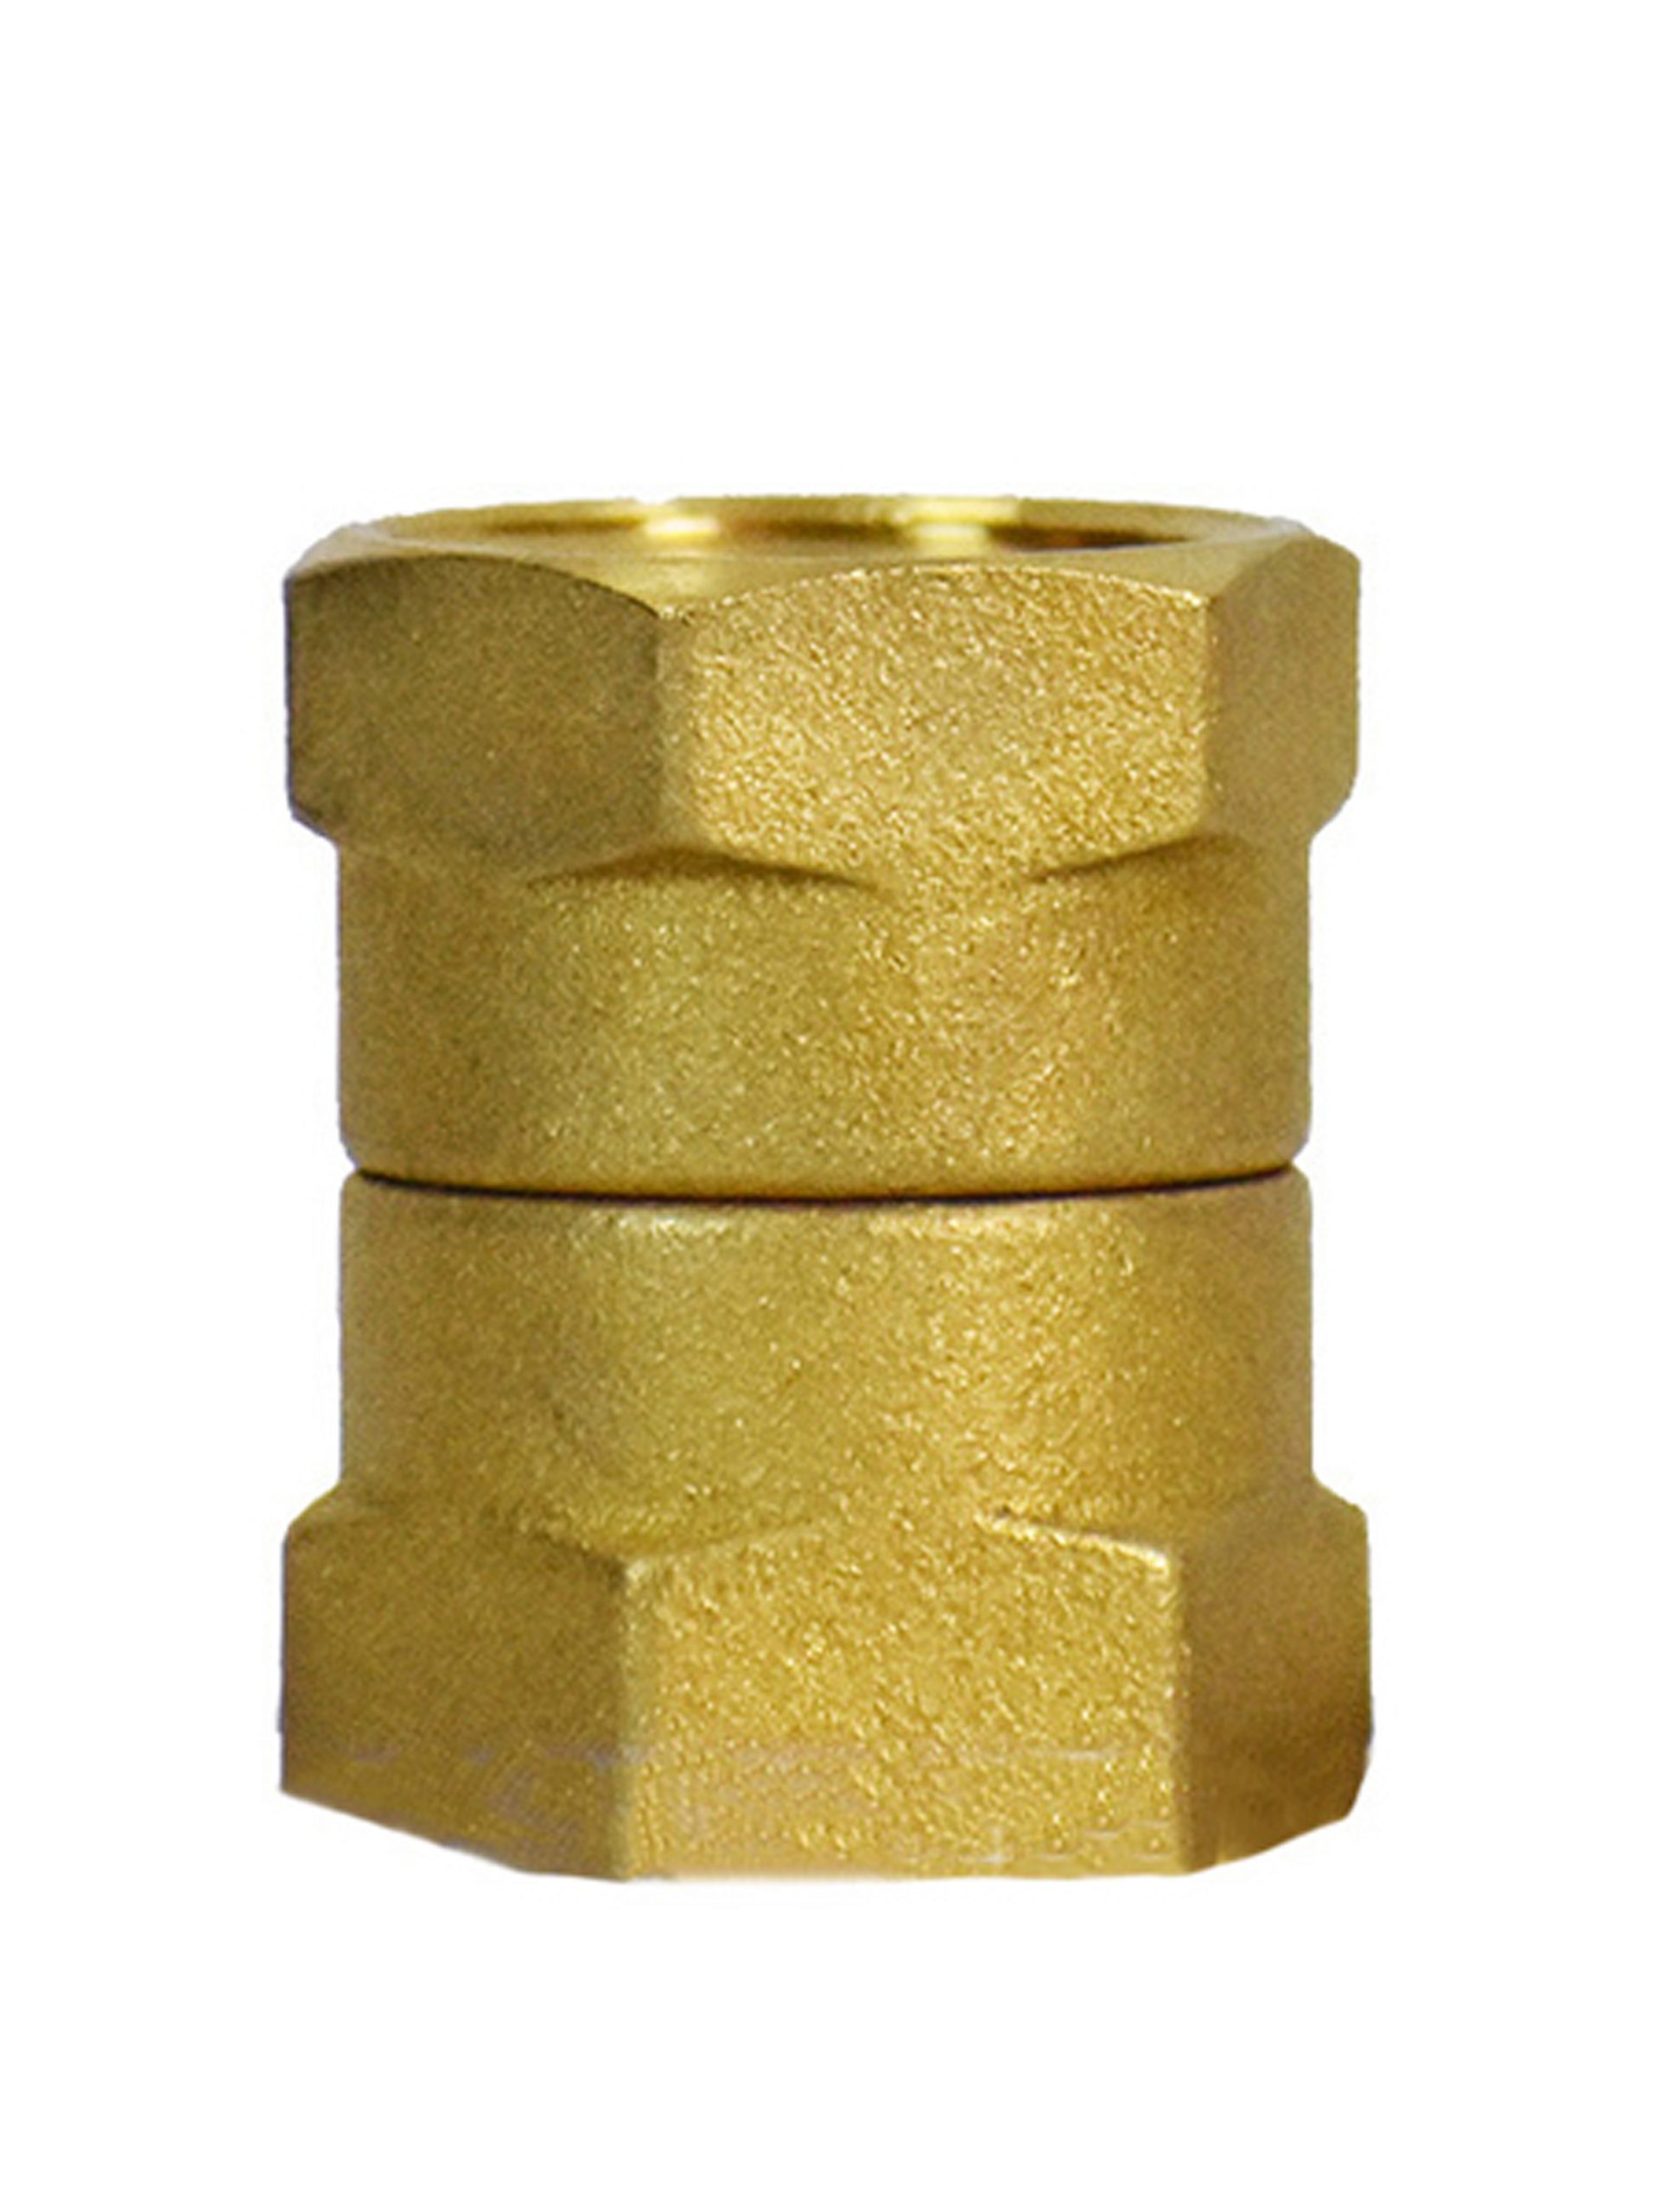 DOUBLE FEMALE NUT 12MM X 12MM , COMAP-CLESSE from Gas Equipment Company Llc Abu Dhabi, UNITED ARAB EMIRATES